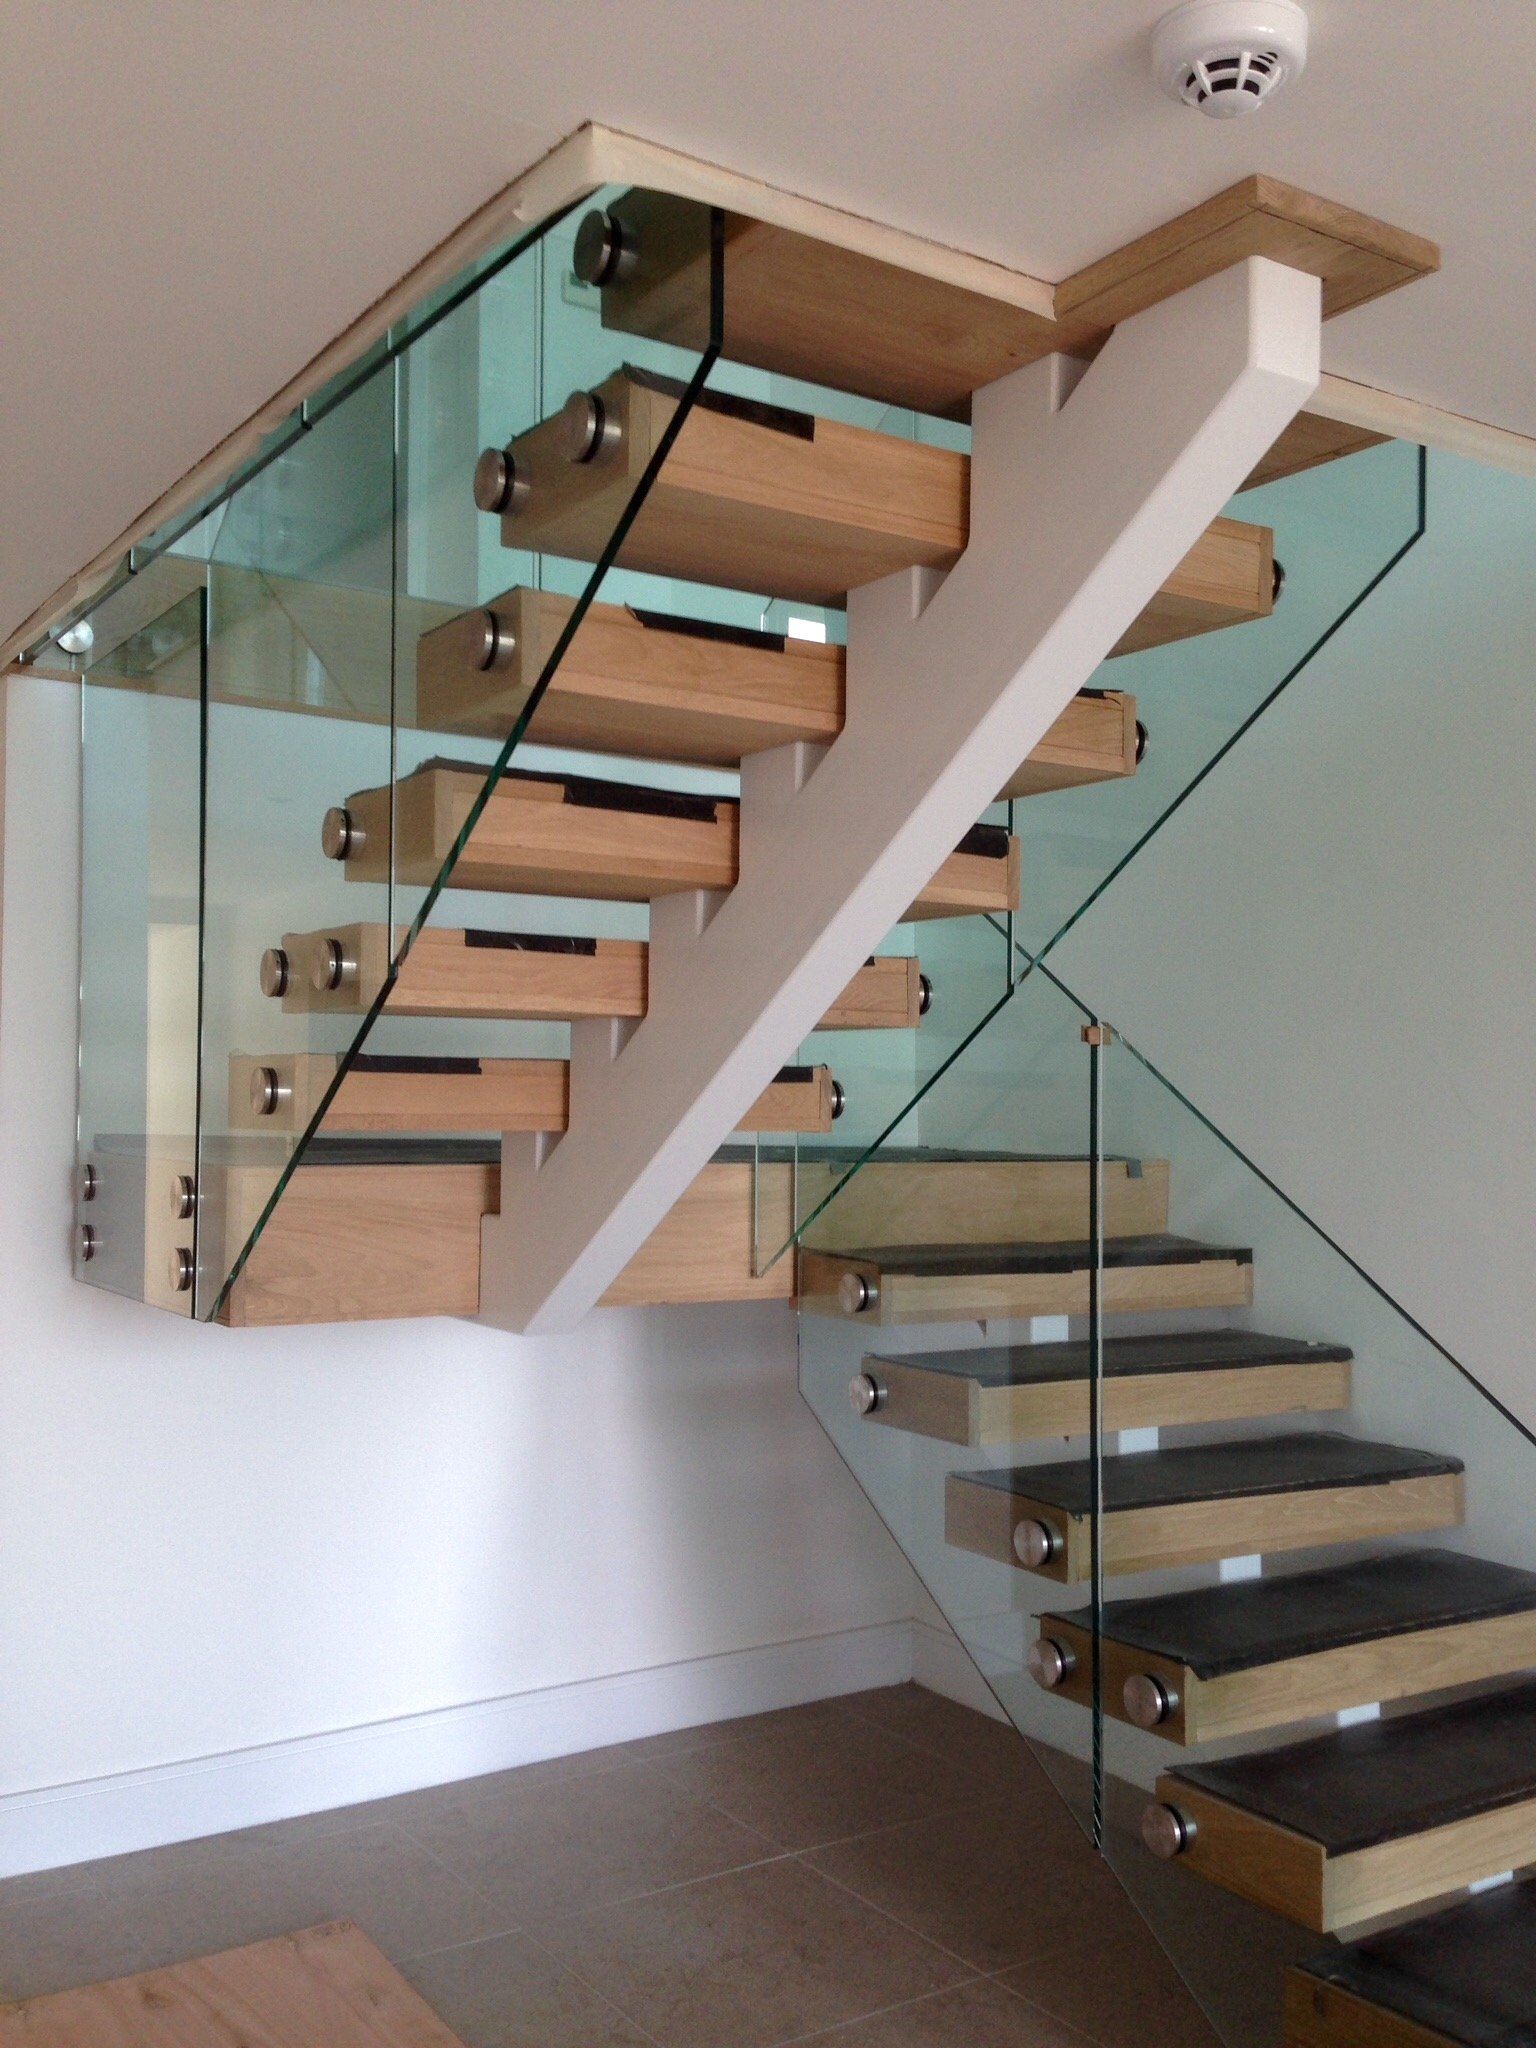 stairs made of glass and wood